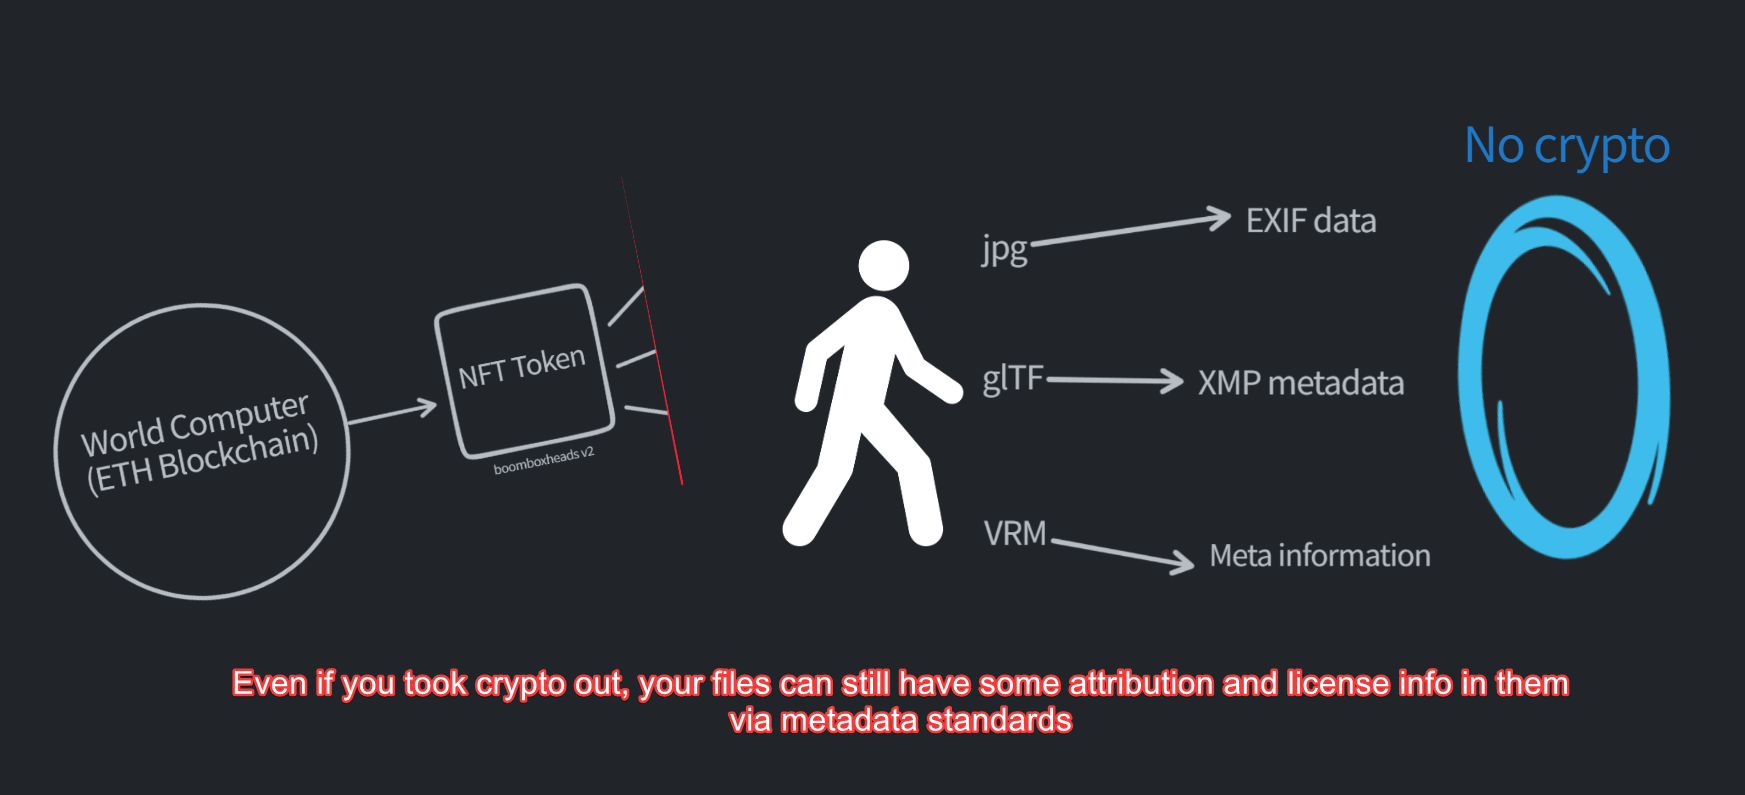 Even if you took crypto out, your files can still have some attribution and license info in them via metadata standards